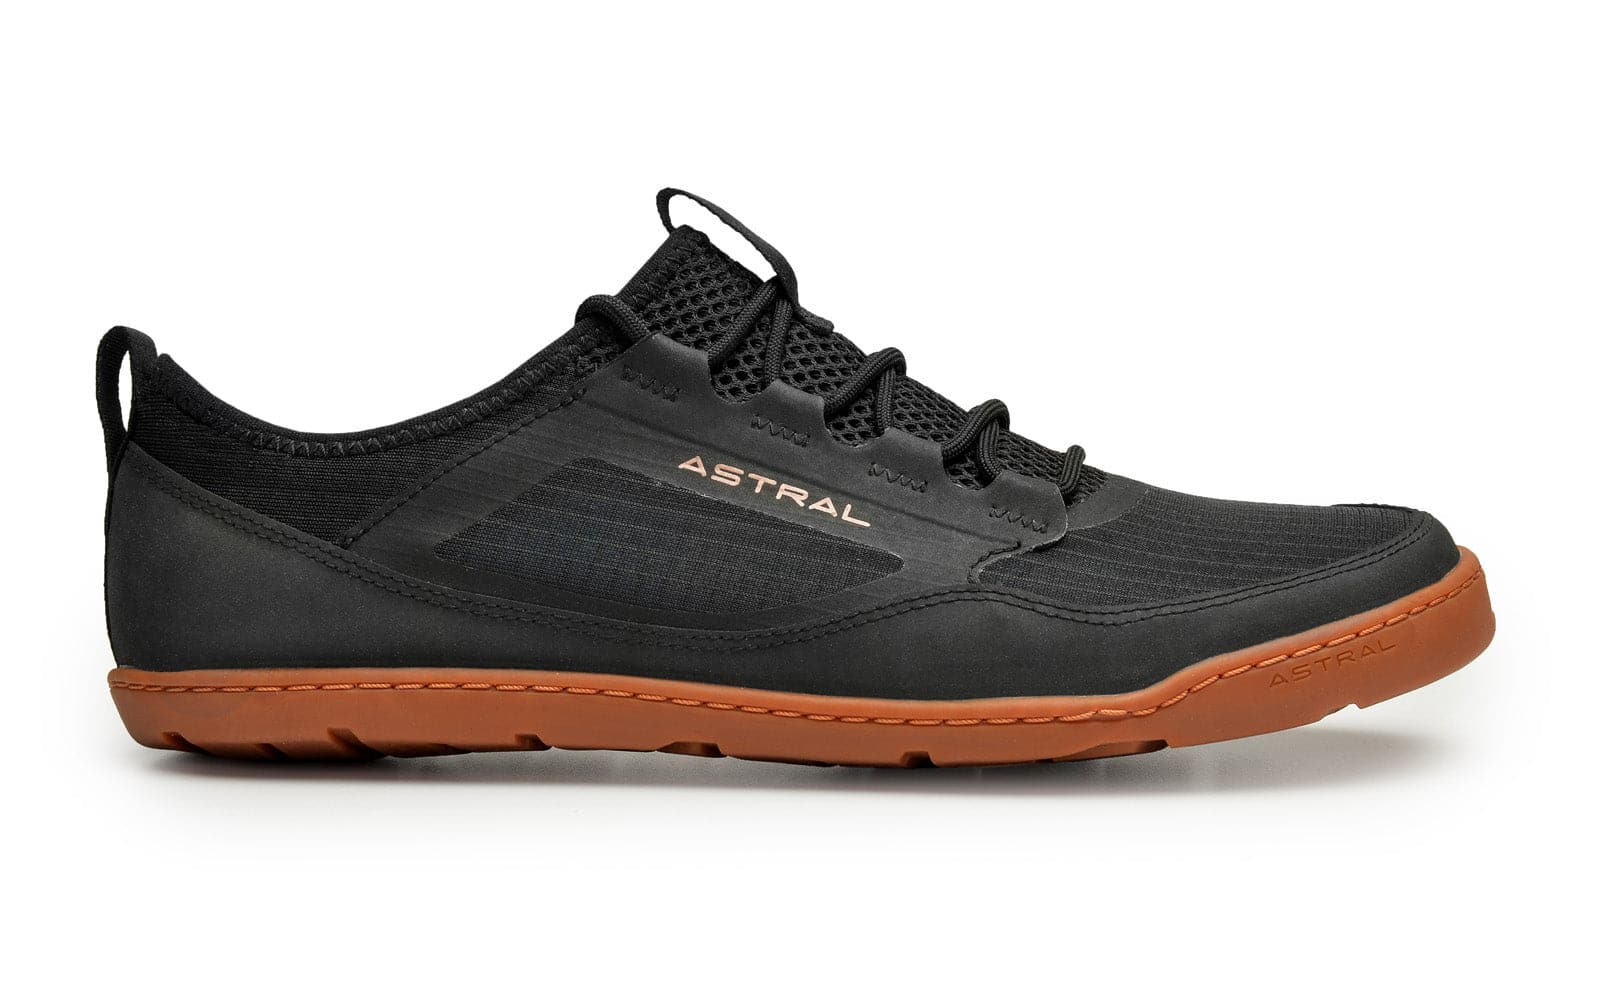 Featuring the Loyak AC - Men's men's footwear manufactured by Astral shown here from a fourth angle.